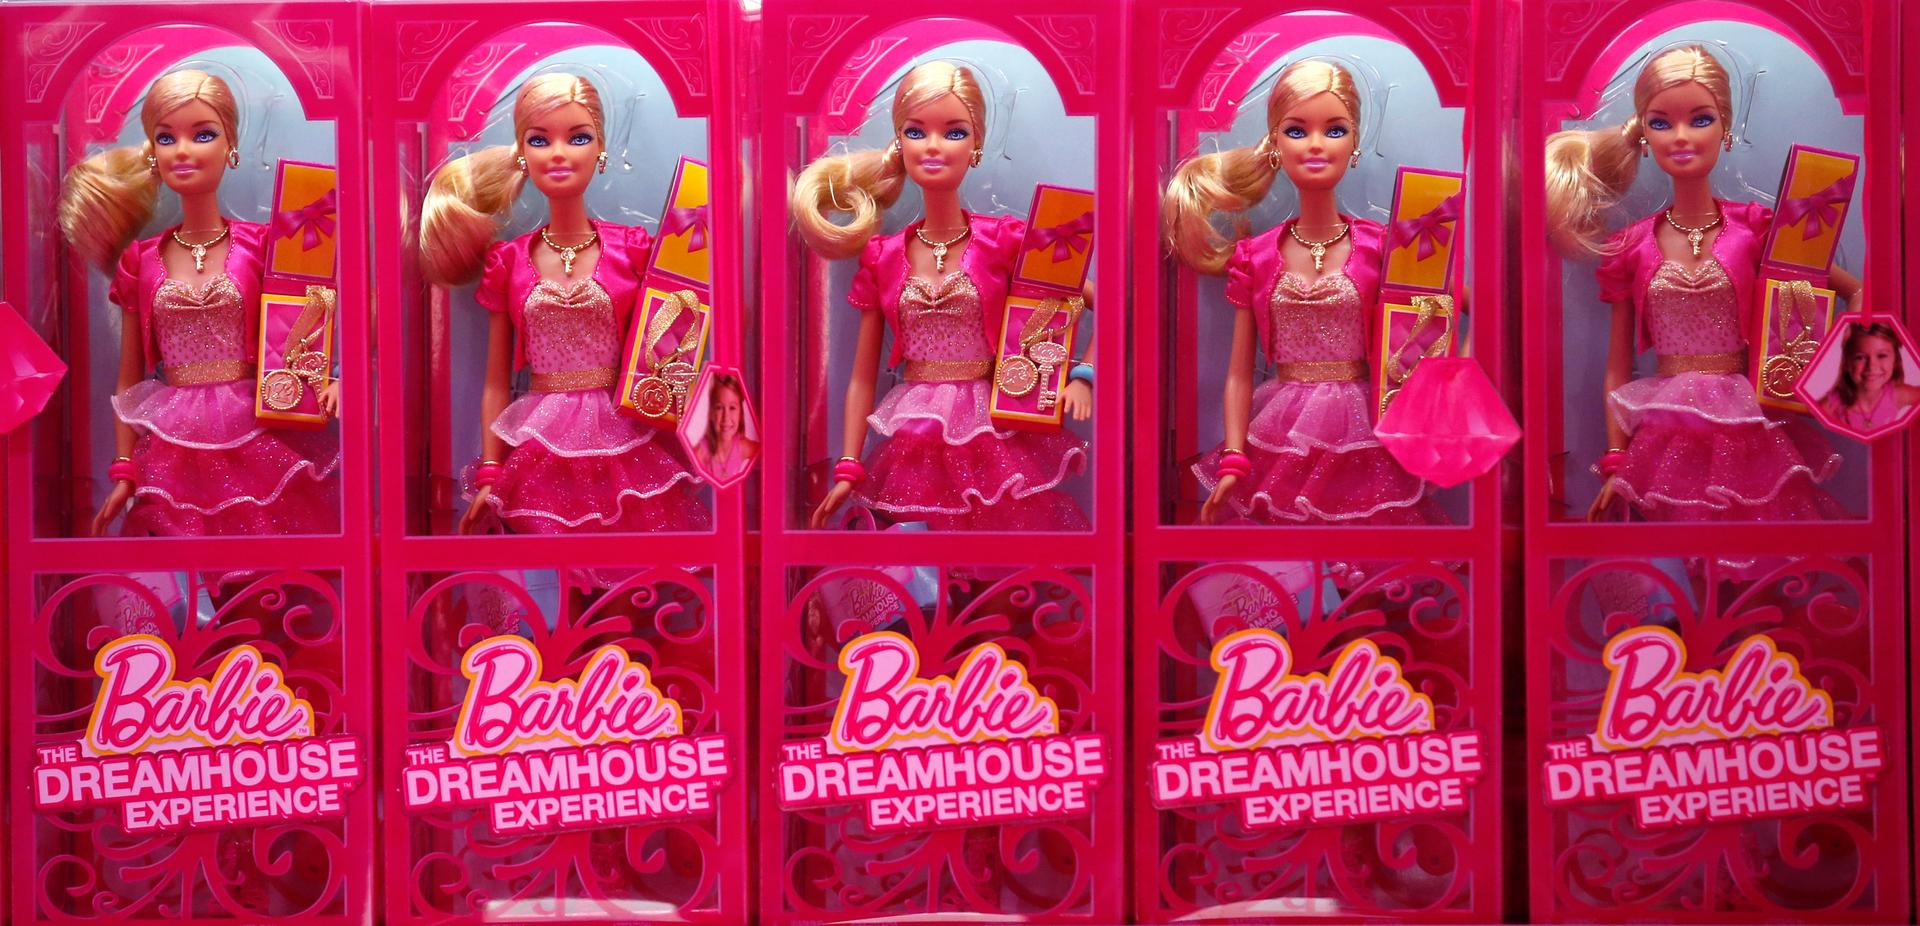 Mattel's Barbie dolls on sale are pictured inside a shop of a life-size "Barbie Dreamhouse" during a media tour in Berlin, May 15, 2013. 